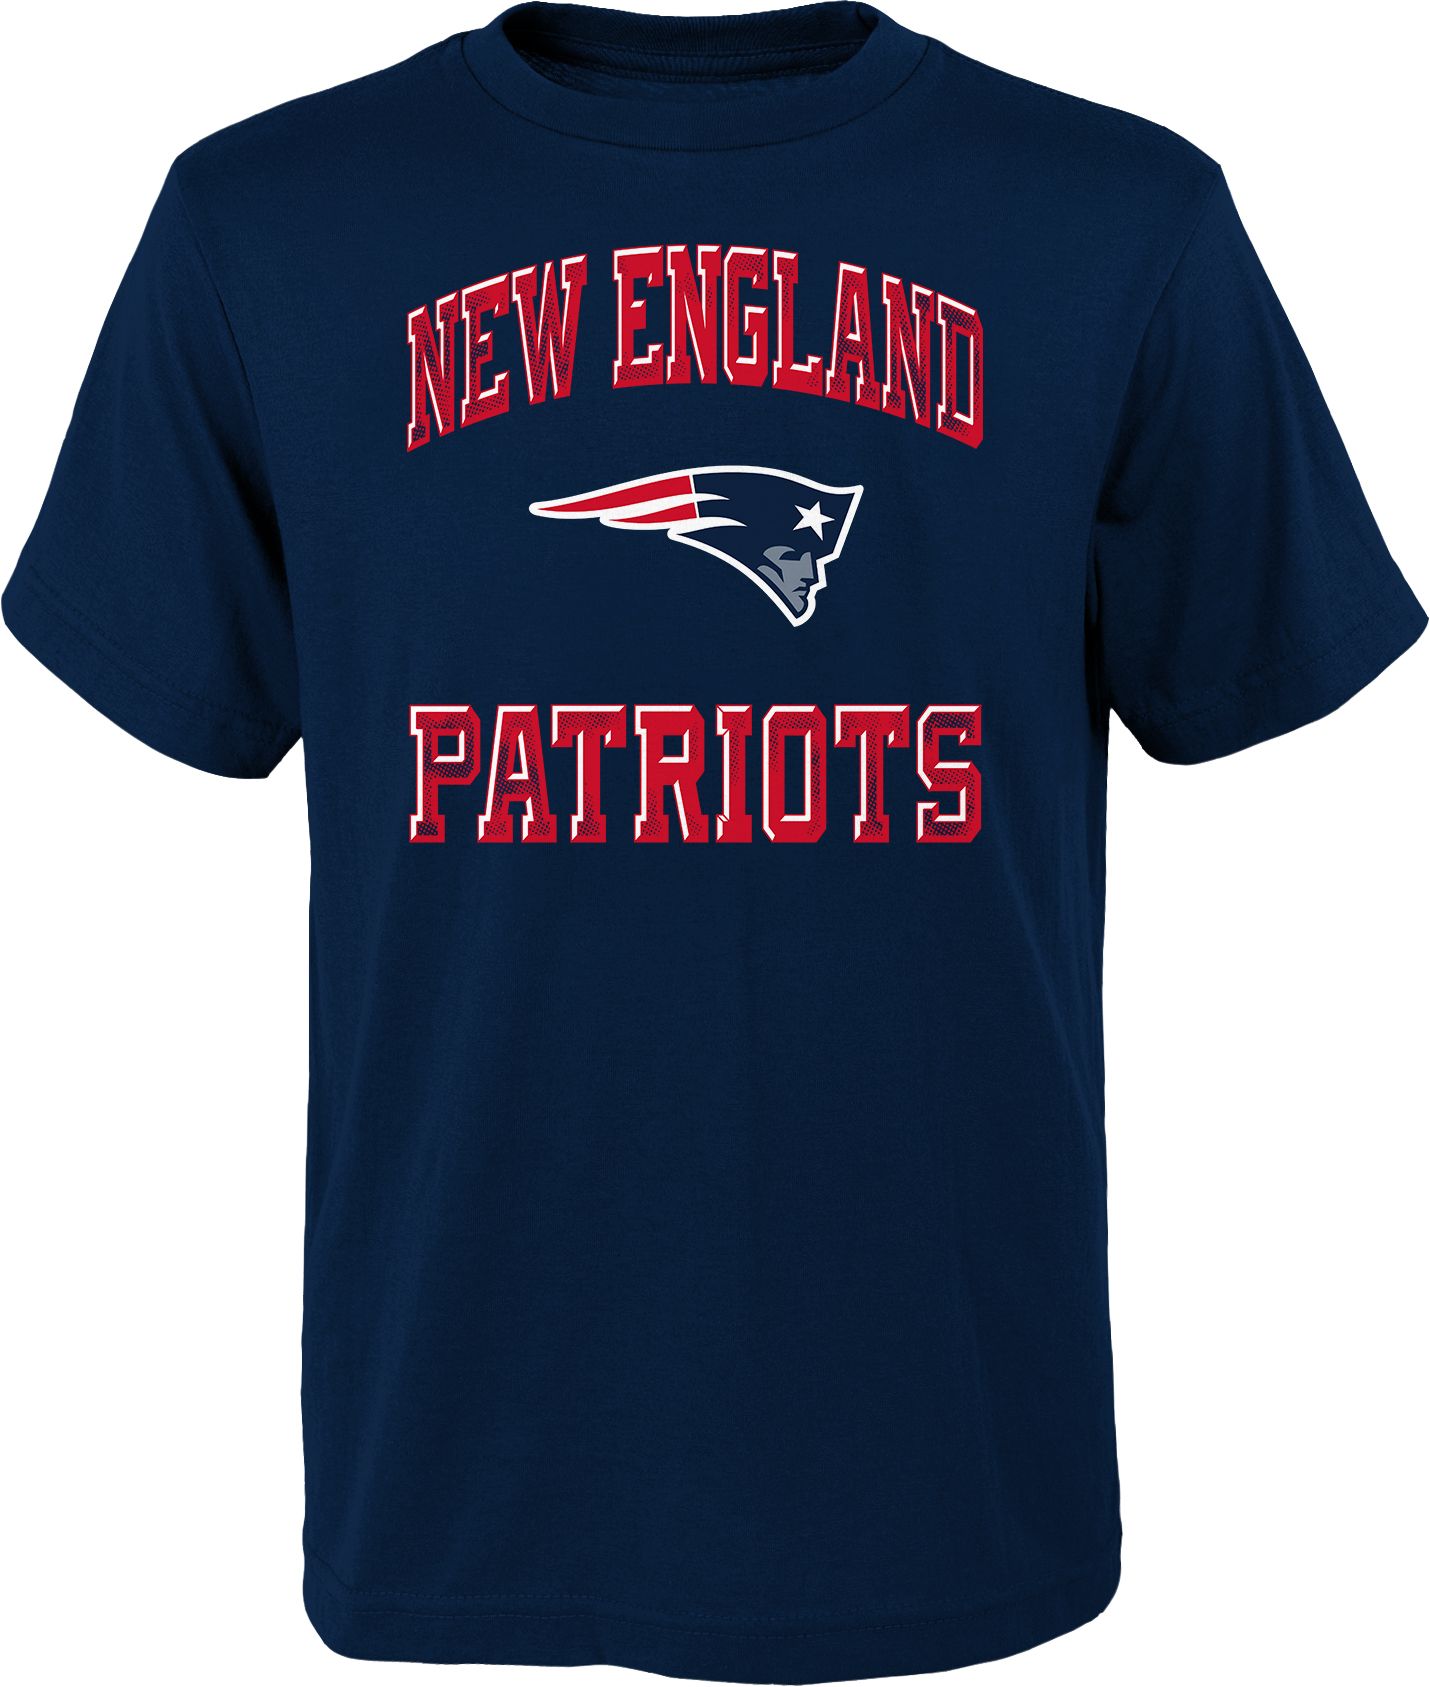 new england patriots youth apparel